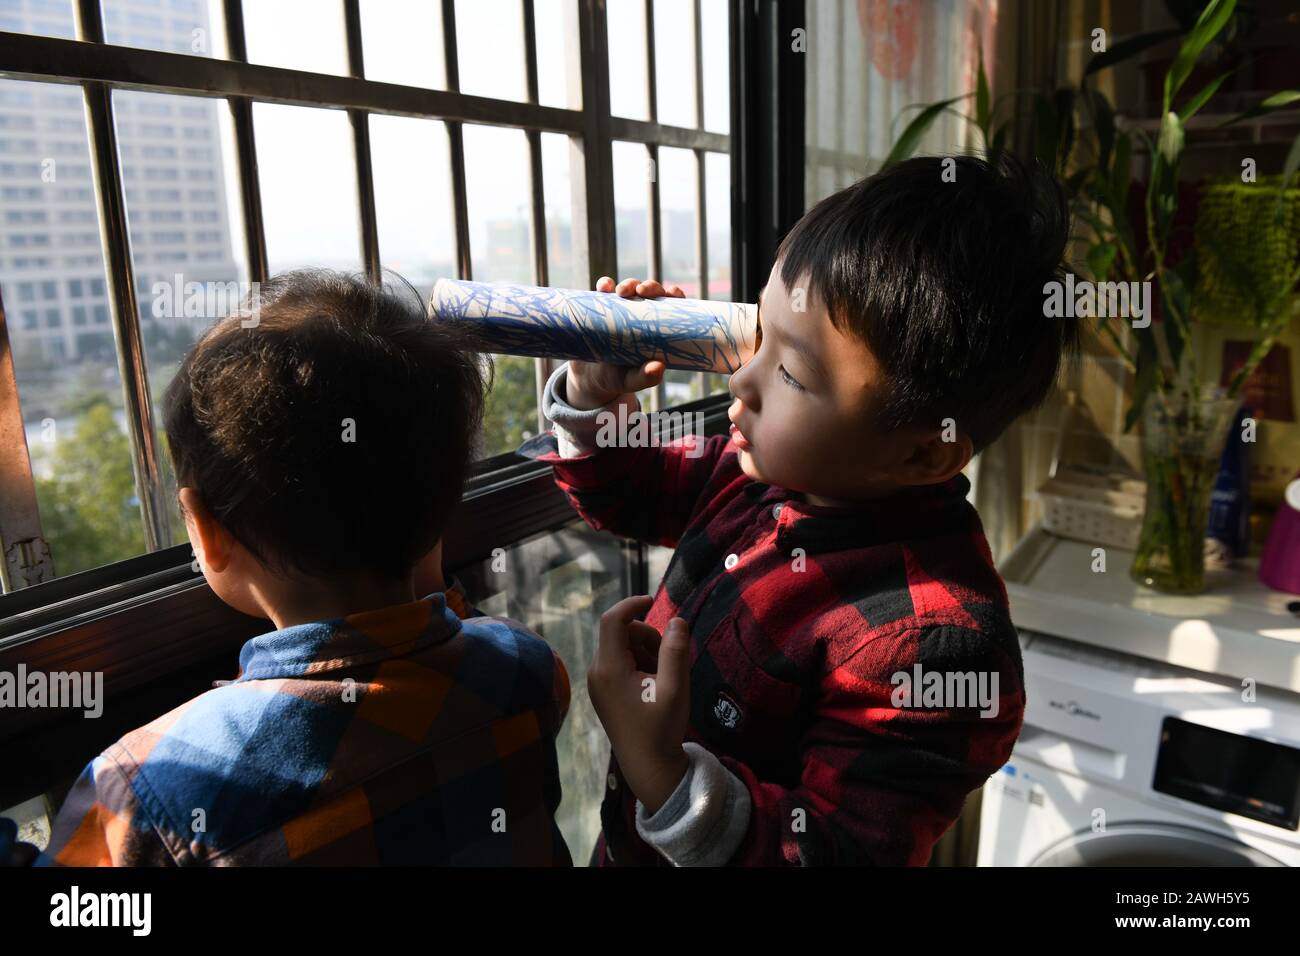 (200209) -- HEFEI, Feb. 9, 2020 (Xinhua) -- Sons of Fang Ji look toward the Second People's Hospital of Hefei on the balcony at home in Hefei, capital of east China's Anhui Province, Feb. 3, 2020. Fang Ji, 34, is a nurse who works in the ICU (intensive care unit) of the Second People's Hospital of Hefei. After the outbreak of the novel coronavirus (2019-nCov), Fang and her colleagues stay 24 hours a day in the hospital taking care of patients in shifts. The balcony of Fang's house lies in front of the hospital. In order to comfort two little sons who miss her badly at home, Fang told them that Stock Photo